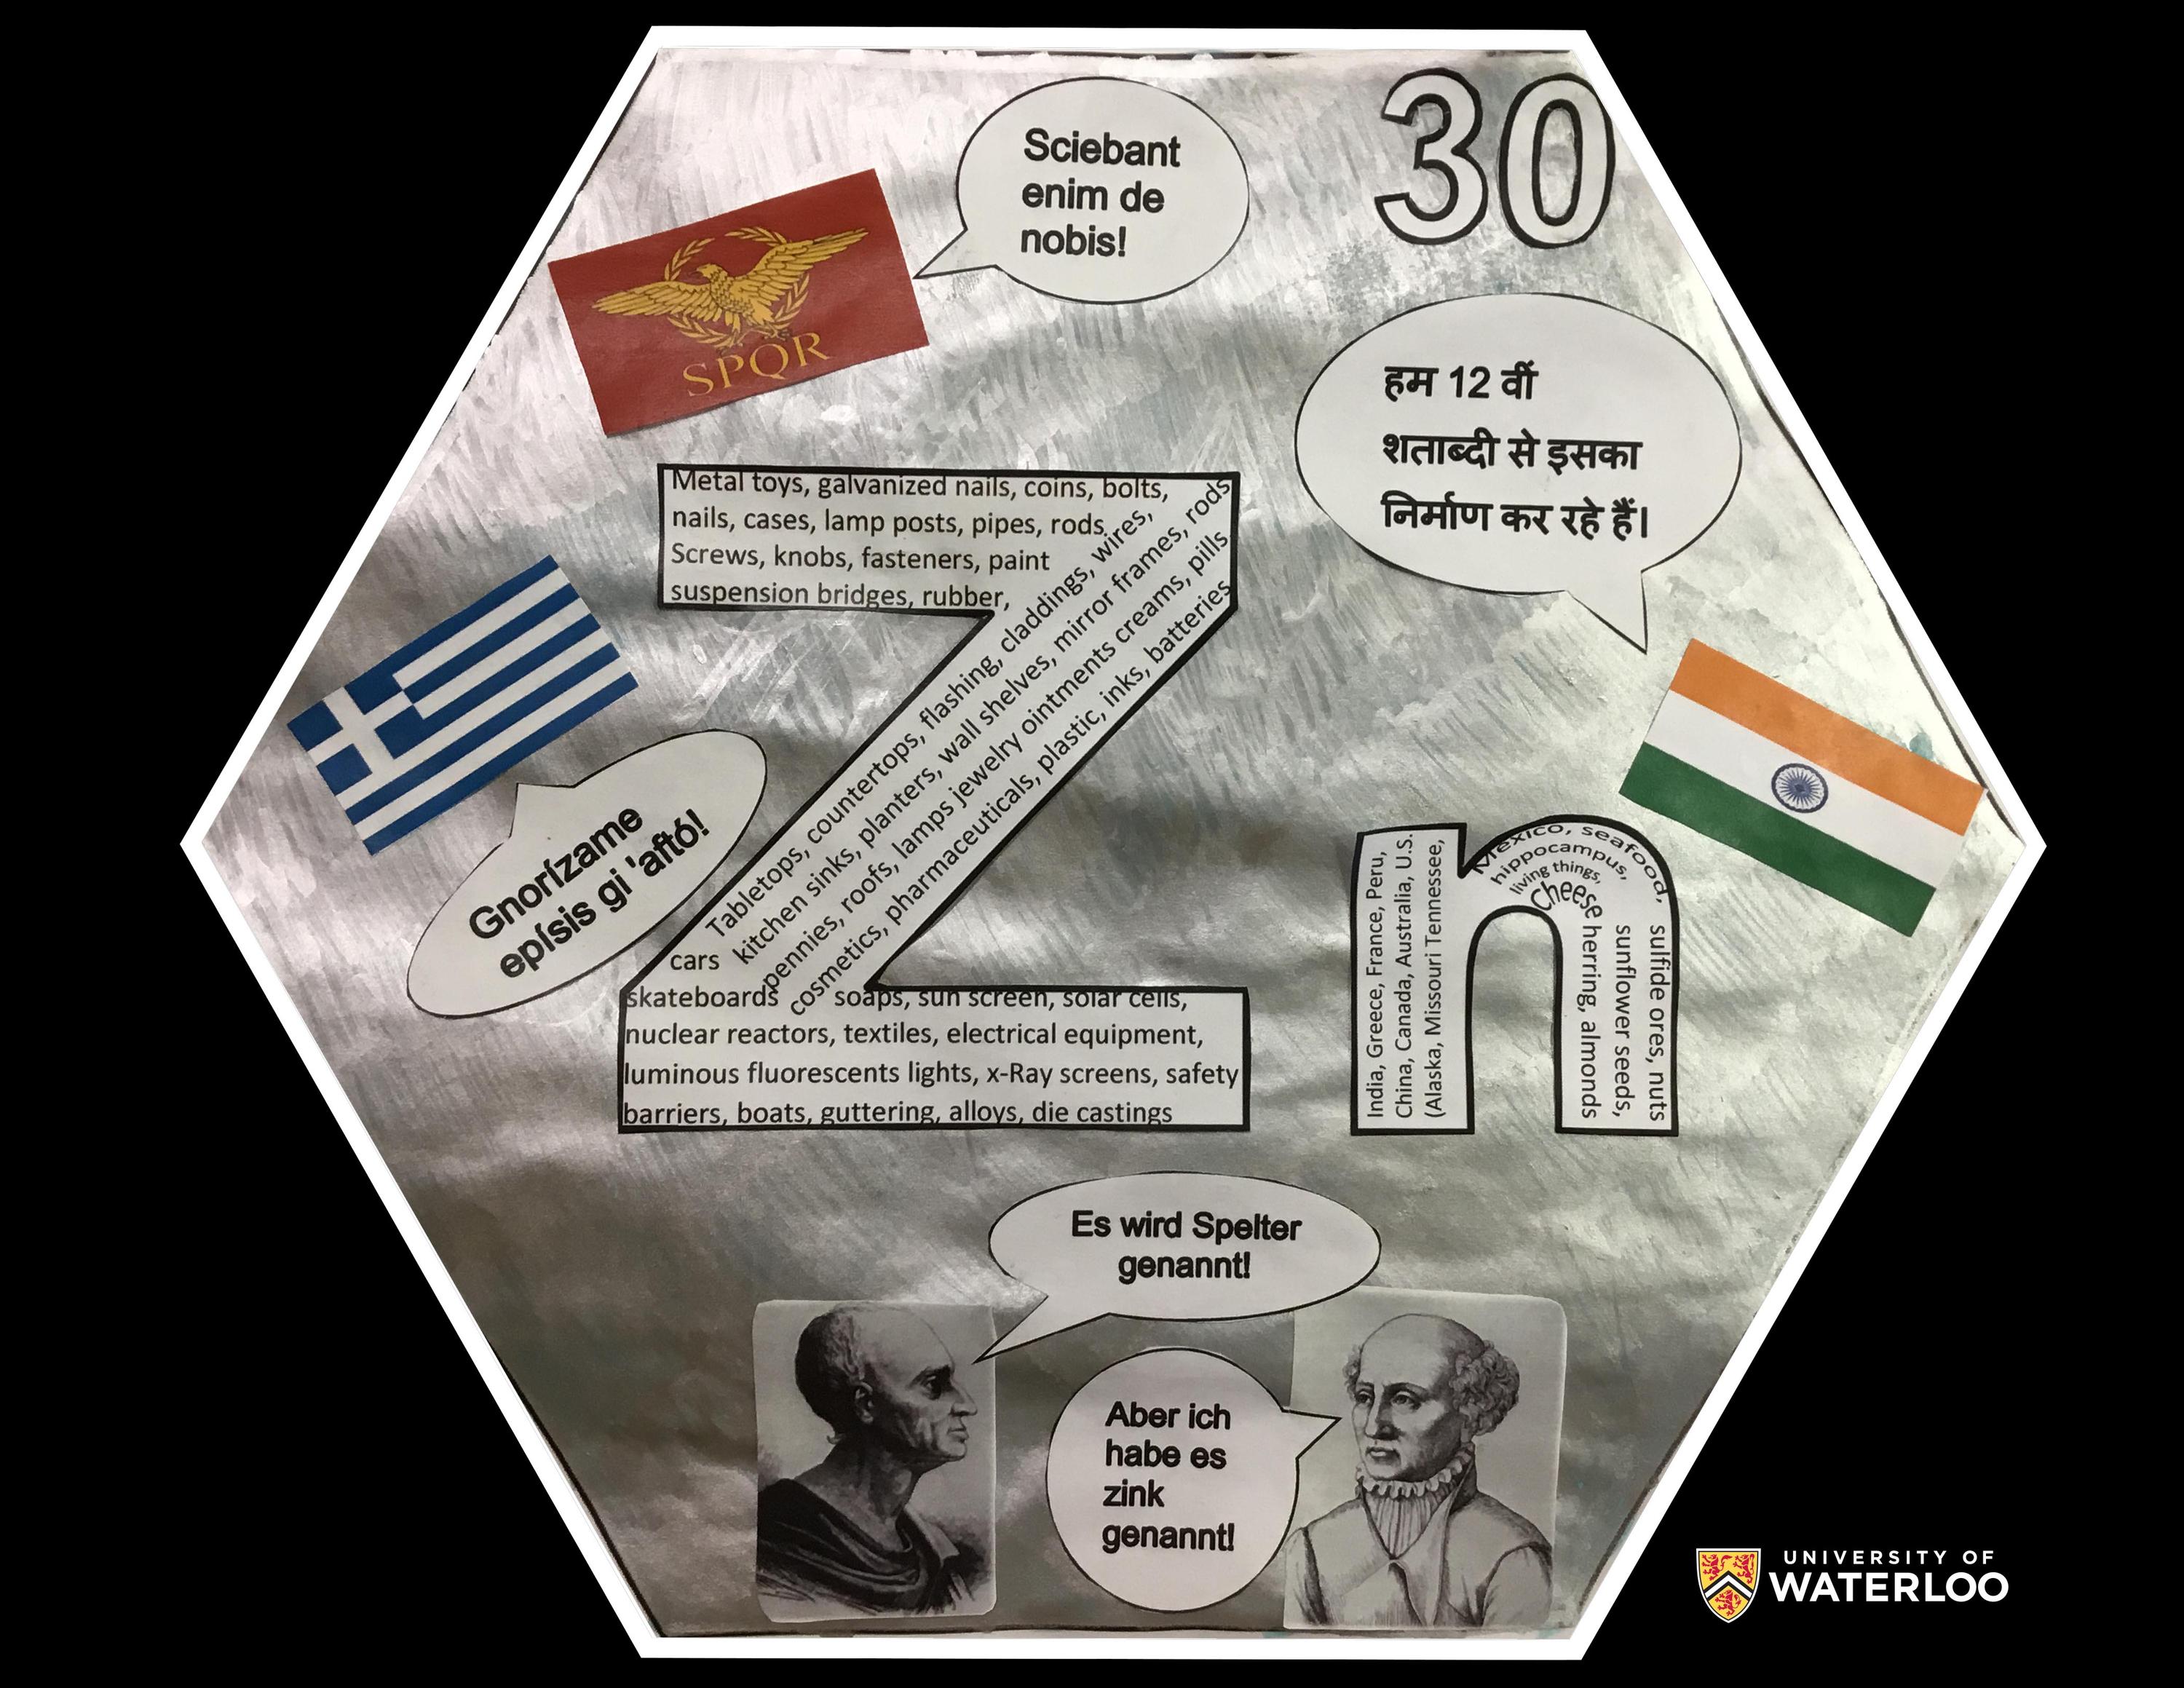 Collage on grey painted background. Chemical symbol “Zn”, centre, cut out of newspaper. Atomic number 30 appear in the upper right corner. Portraits of Paracelsus and Andreas Sigismund Marggraf bottom. National flags of Greece, the Roman Empire, and India appear all around. Each flag and portrait is saying something in their country’s native language.